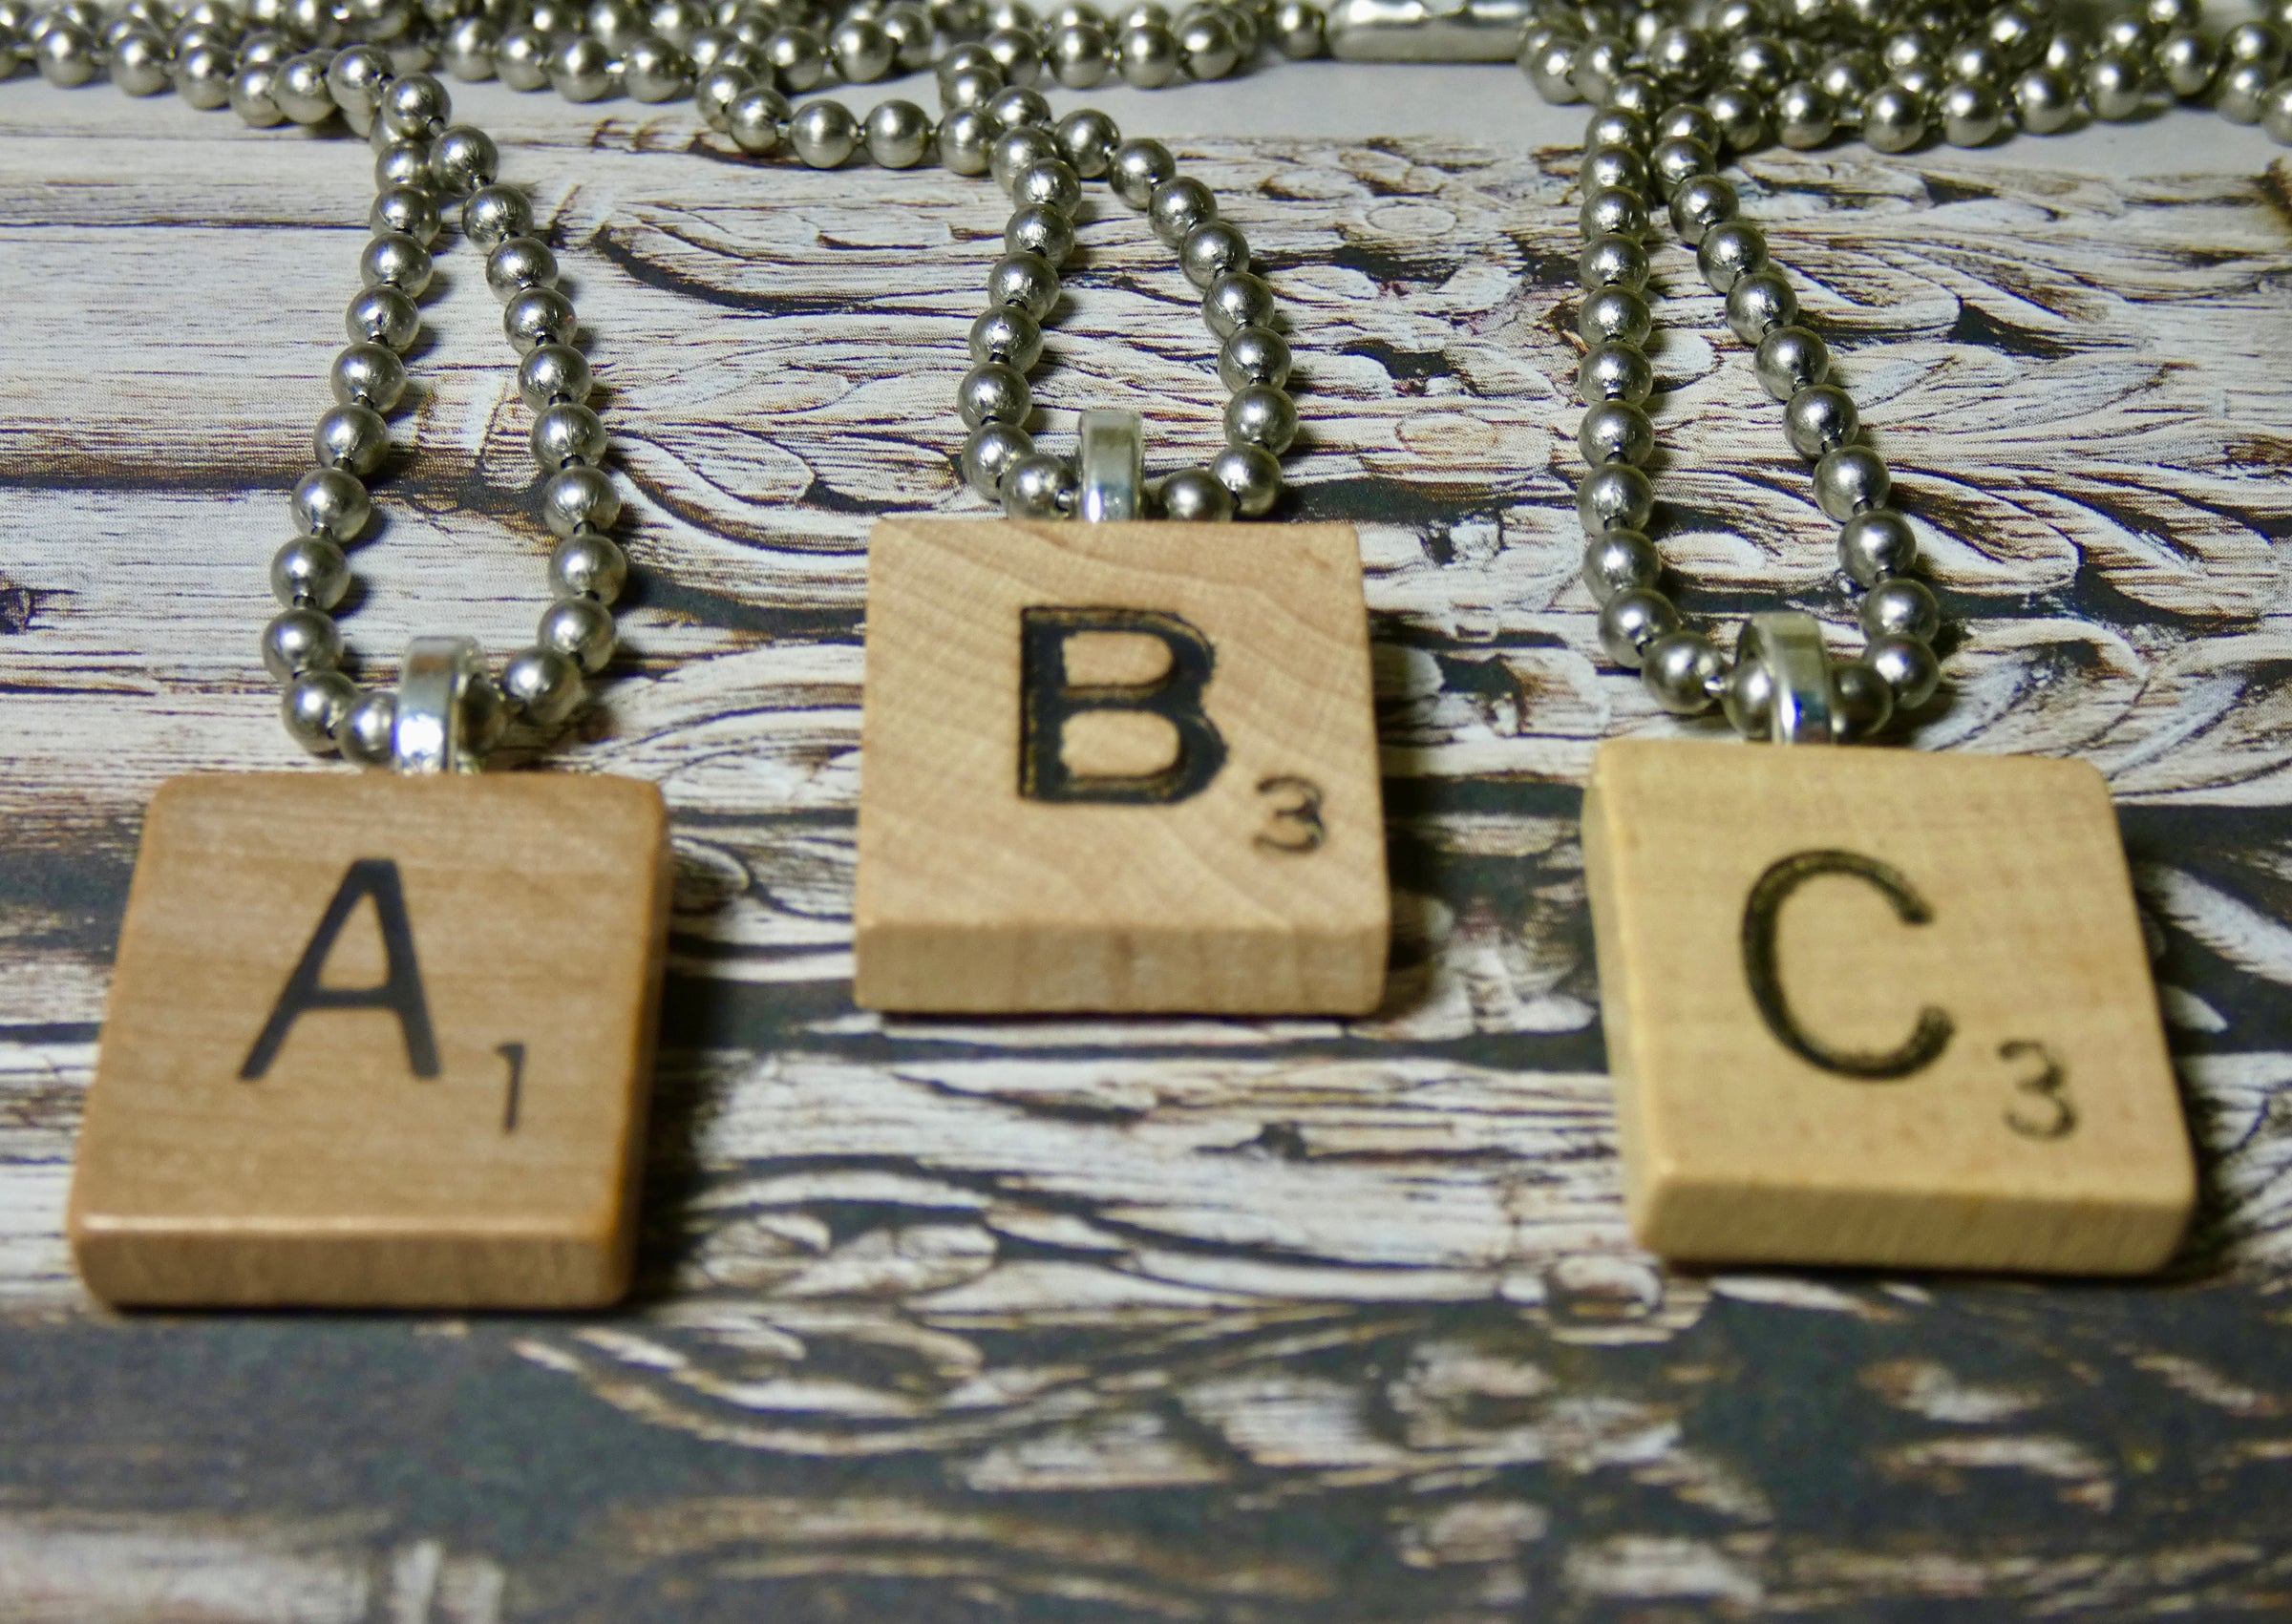 Scrabble Tile Inspired Hand Stamped Necklace